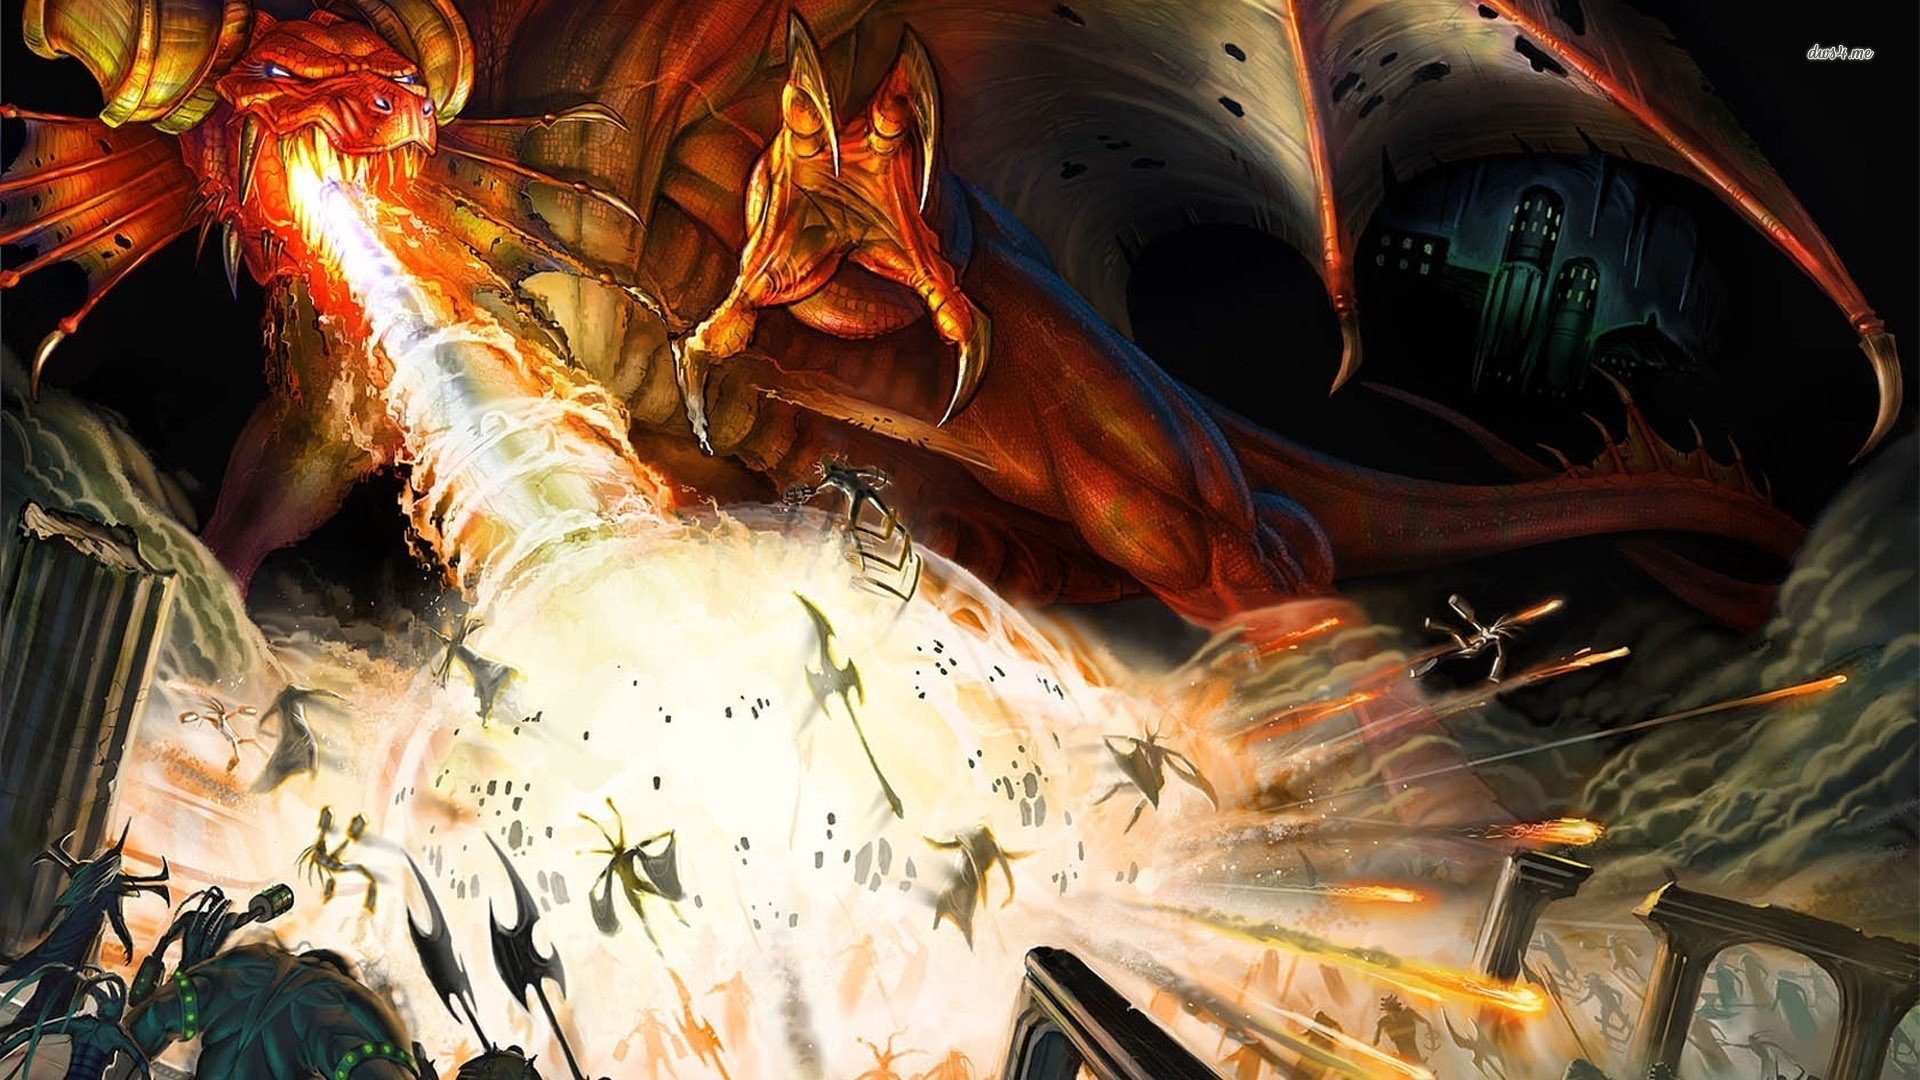 dungeons and dragons wallpaper,cg artwork,flame,fictional character,pc game,dragon